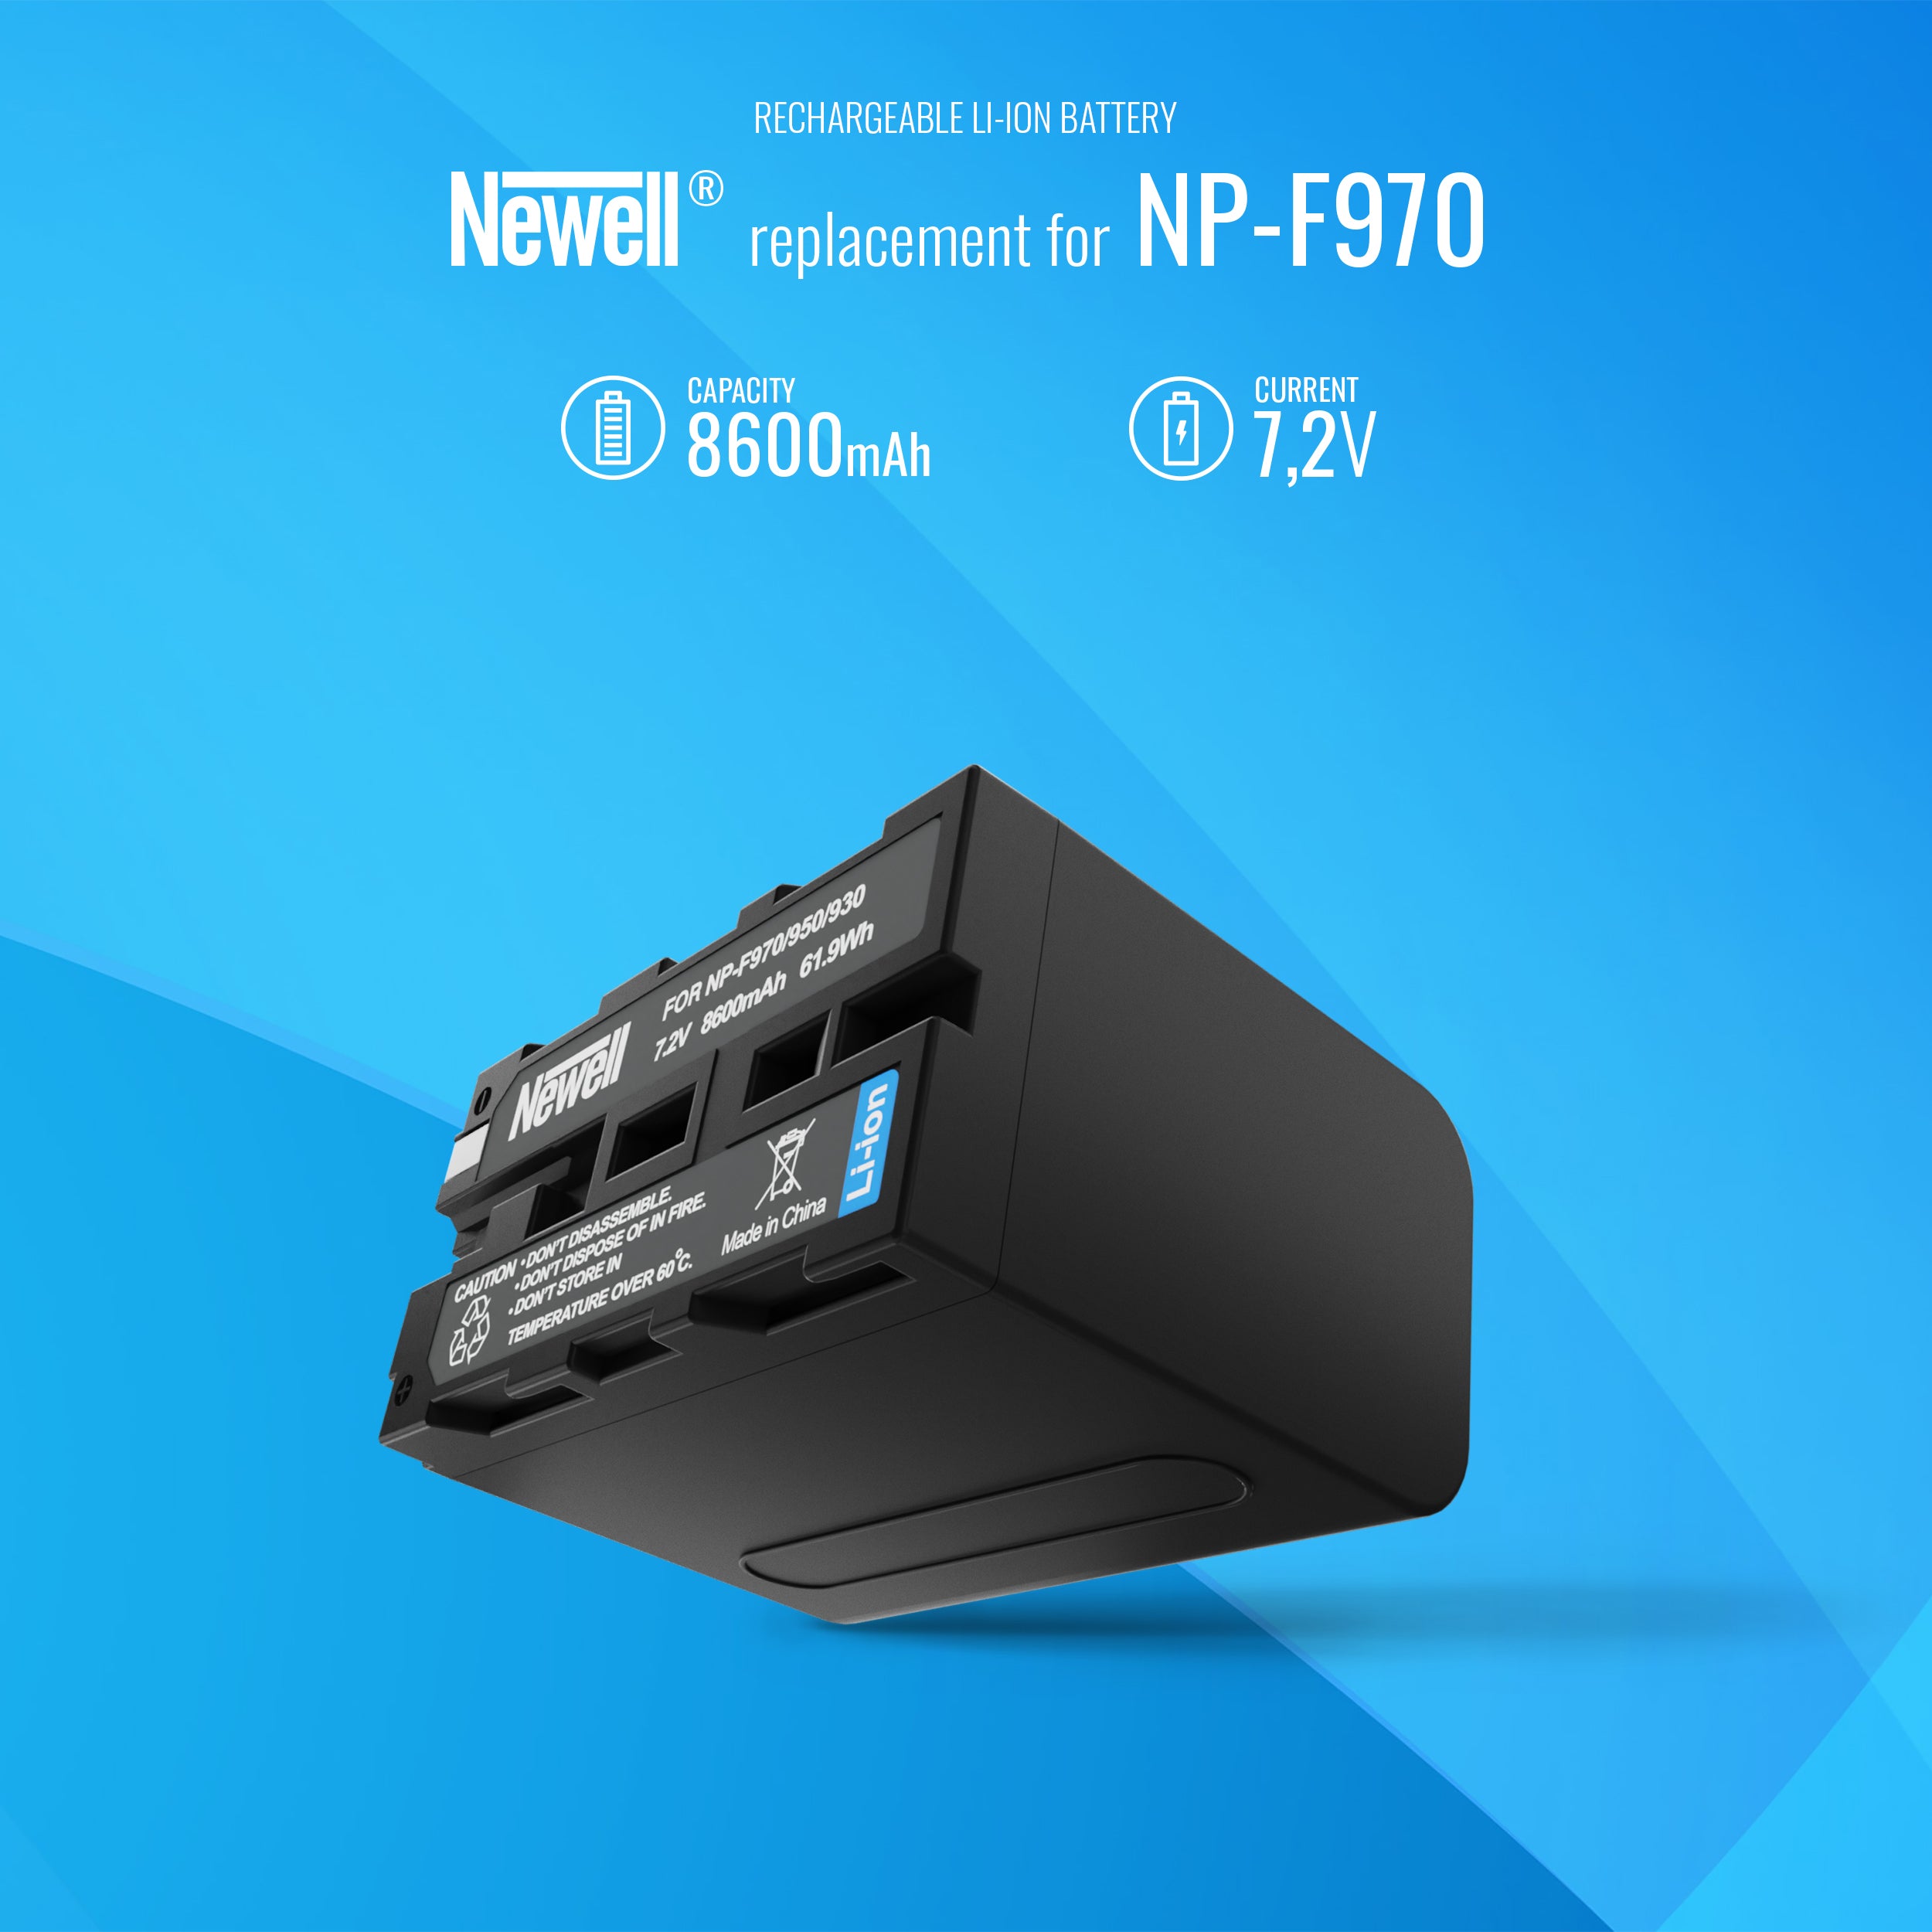 Newell rechargable battery NP-F970